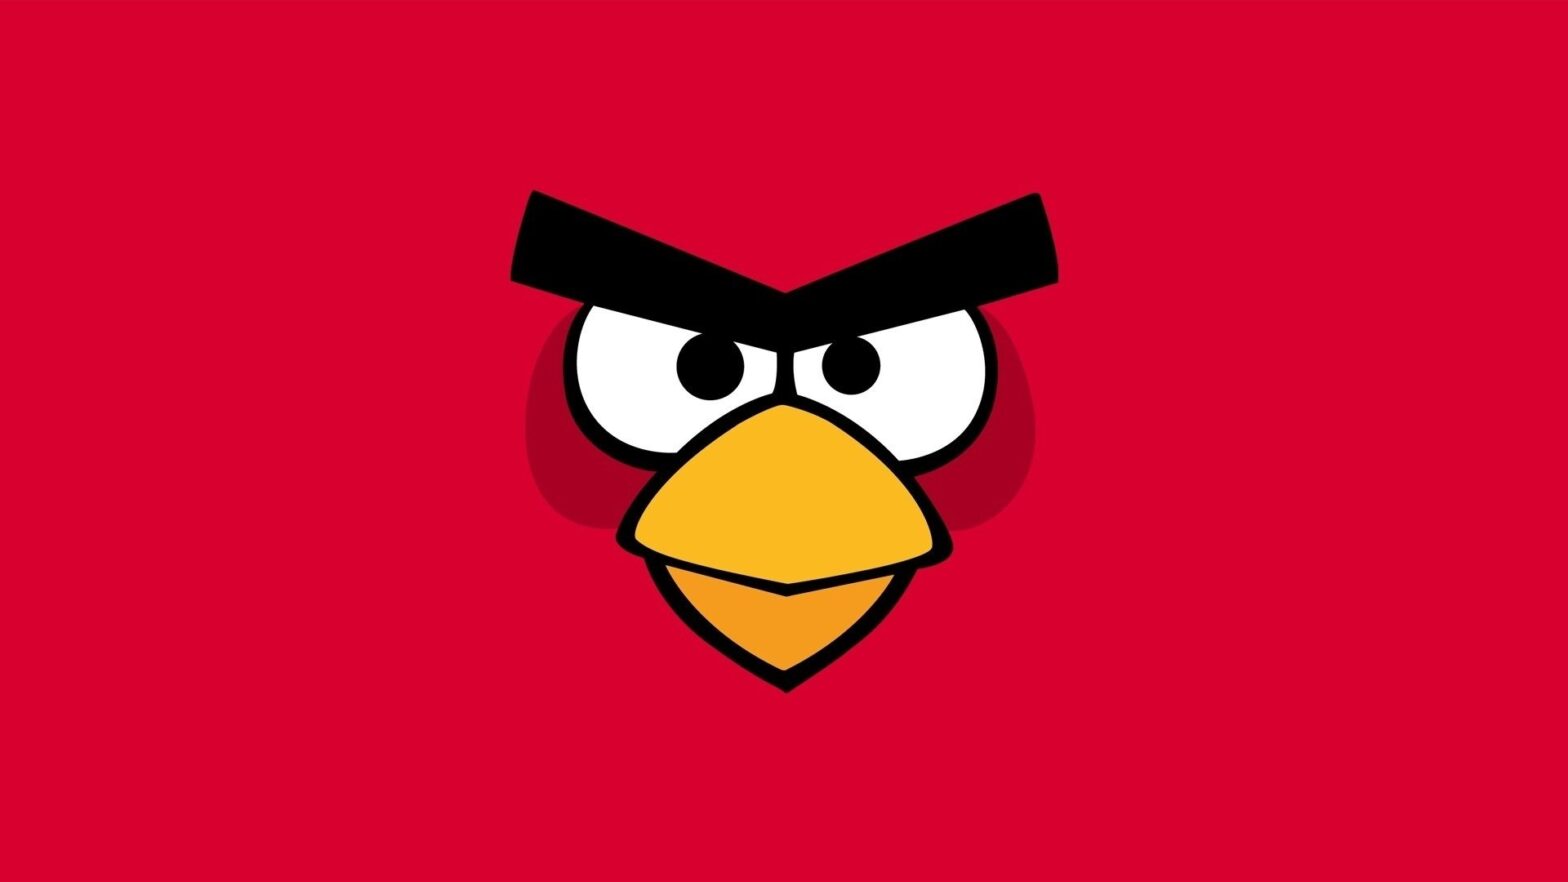 SEGA is close to closing a deal to buy Rovio for $1 billion